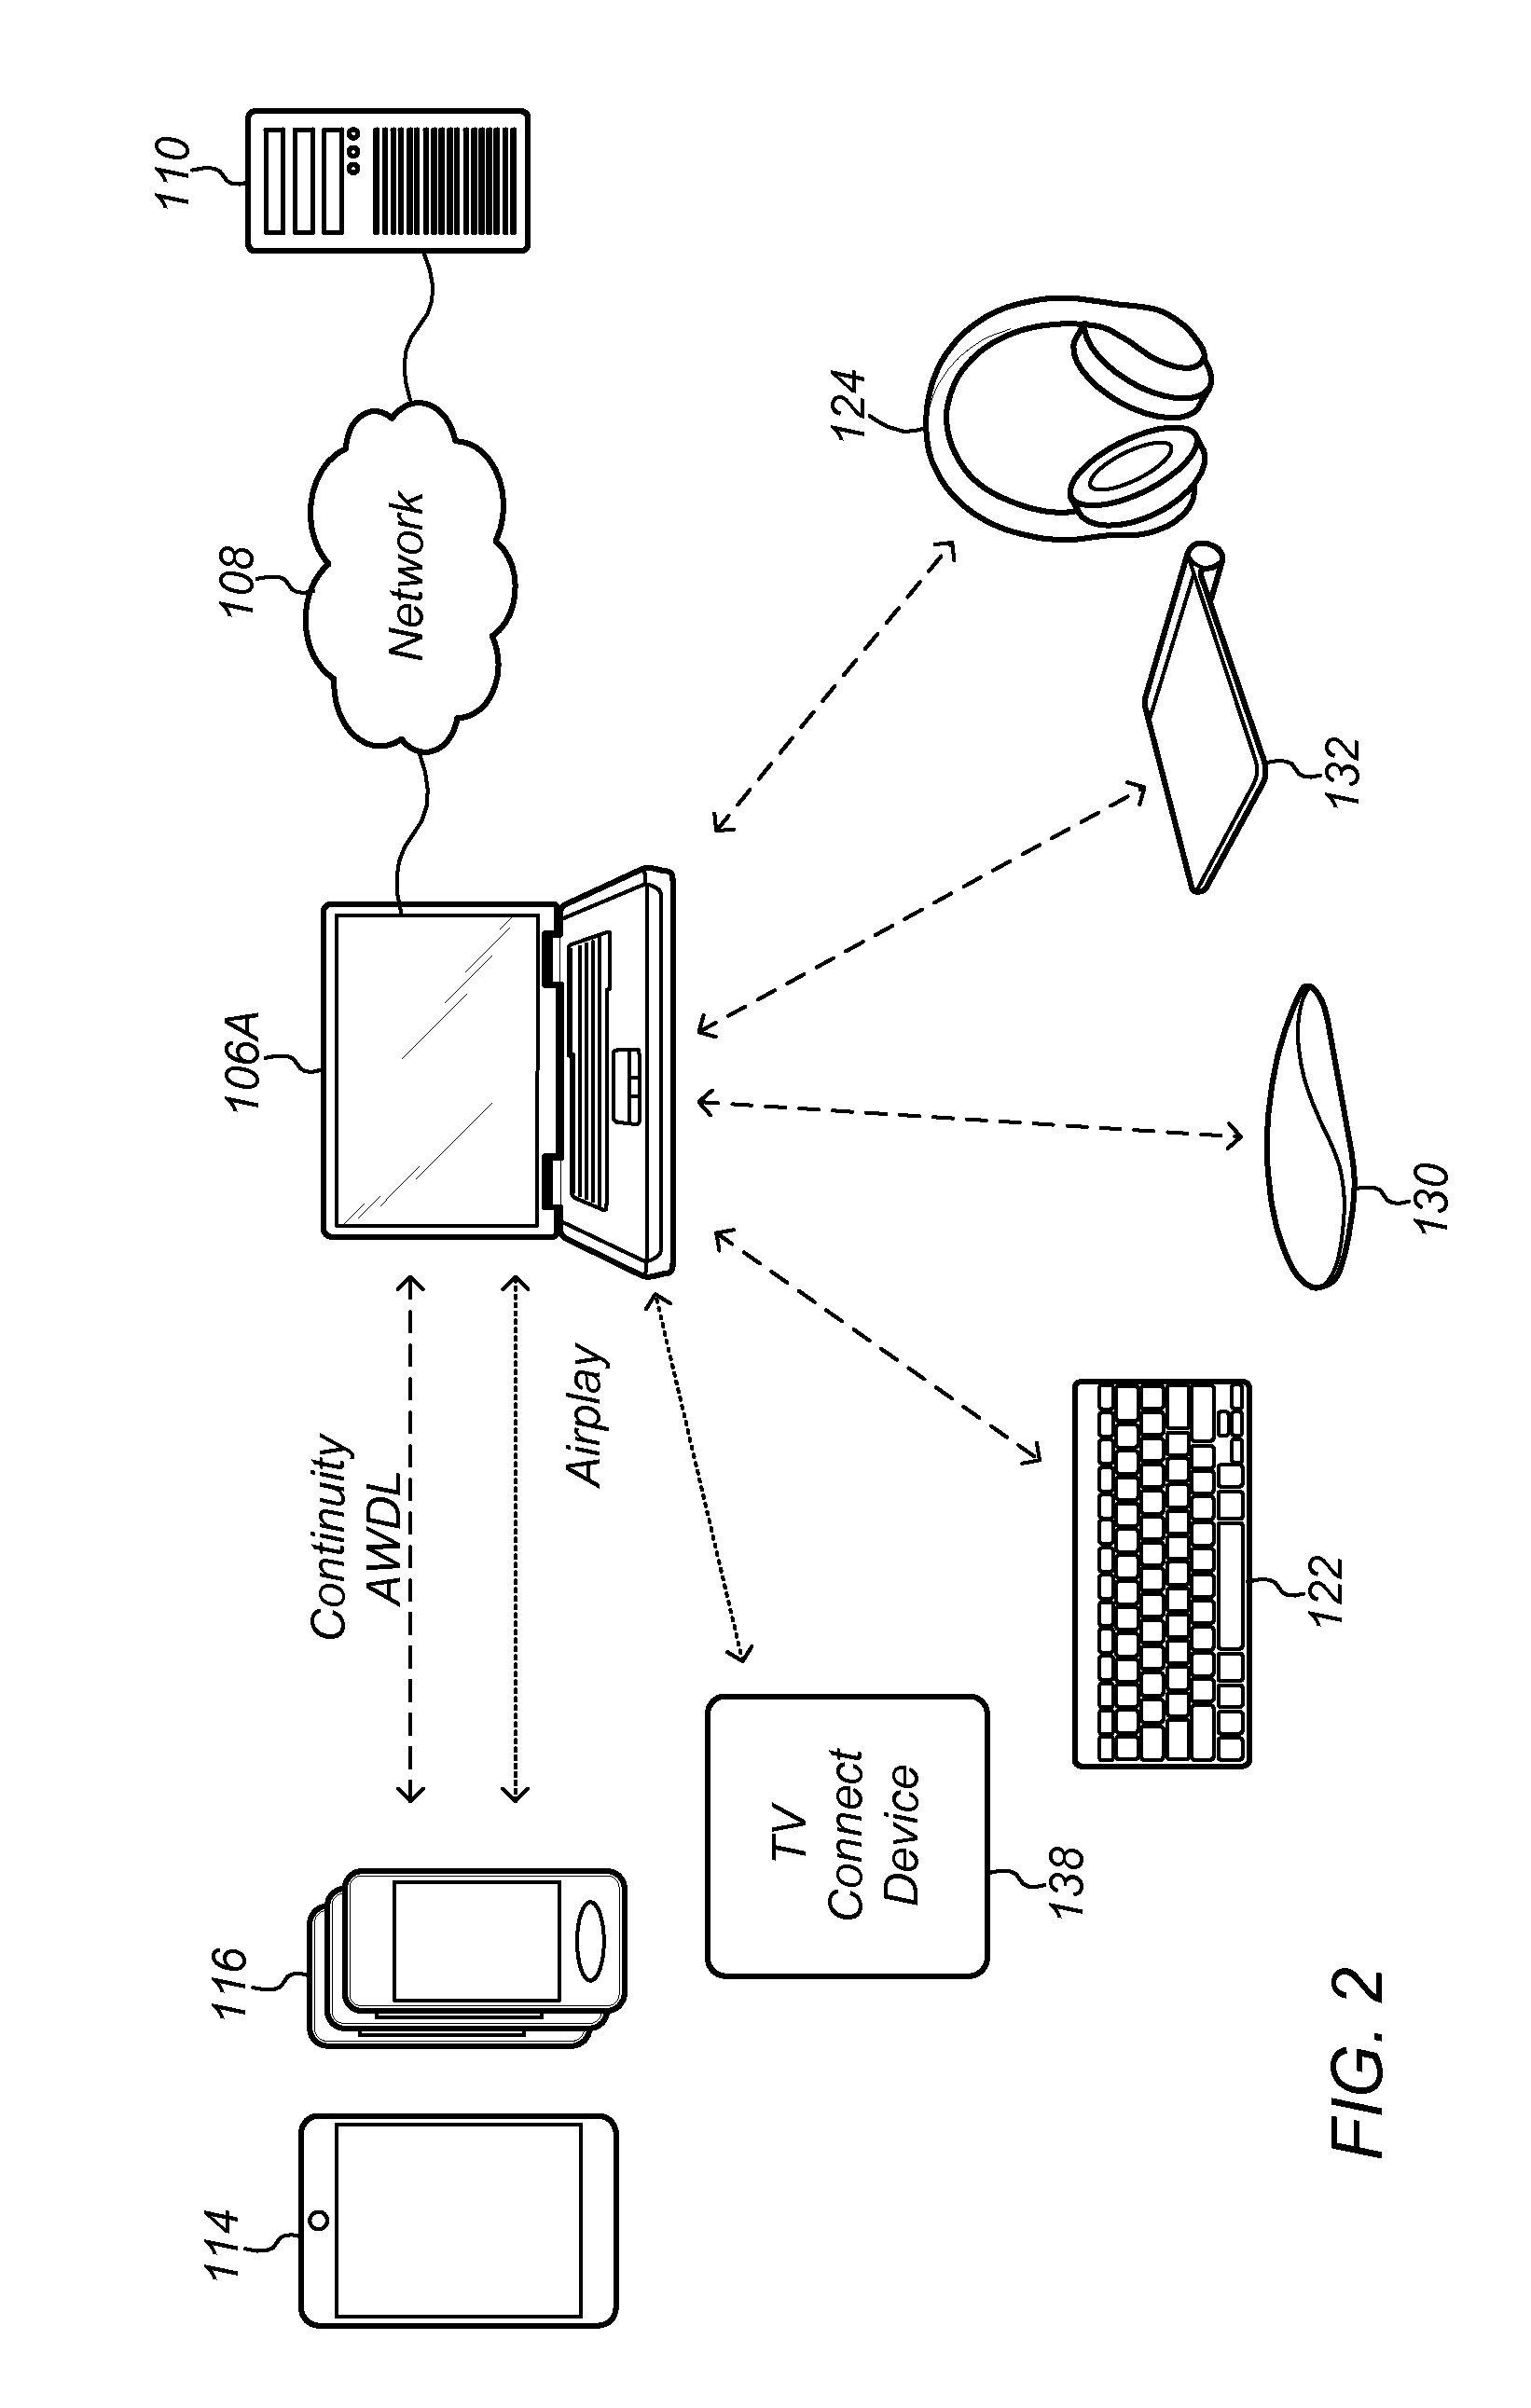 Cloud-Based Proximity Pairing and Switching for Peer-to-Peer Devices